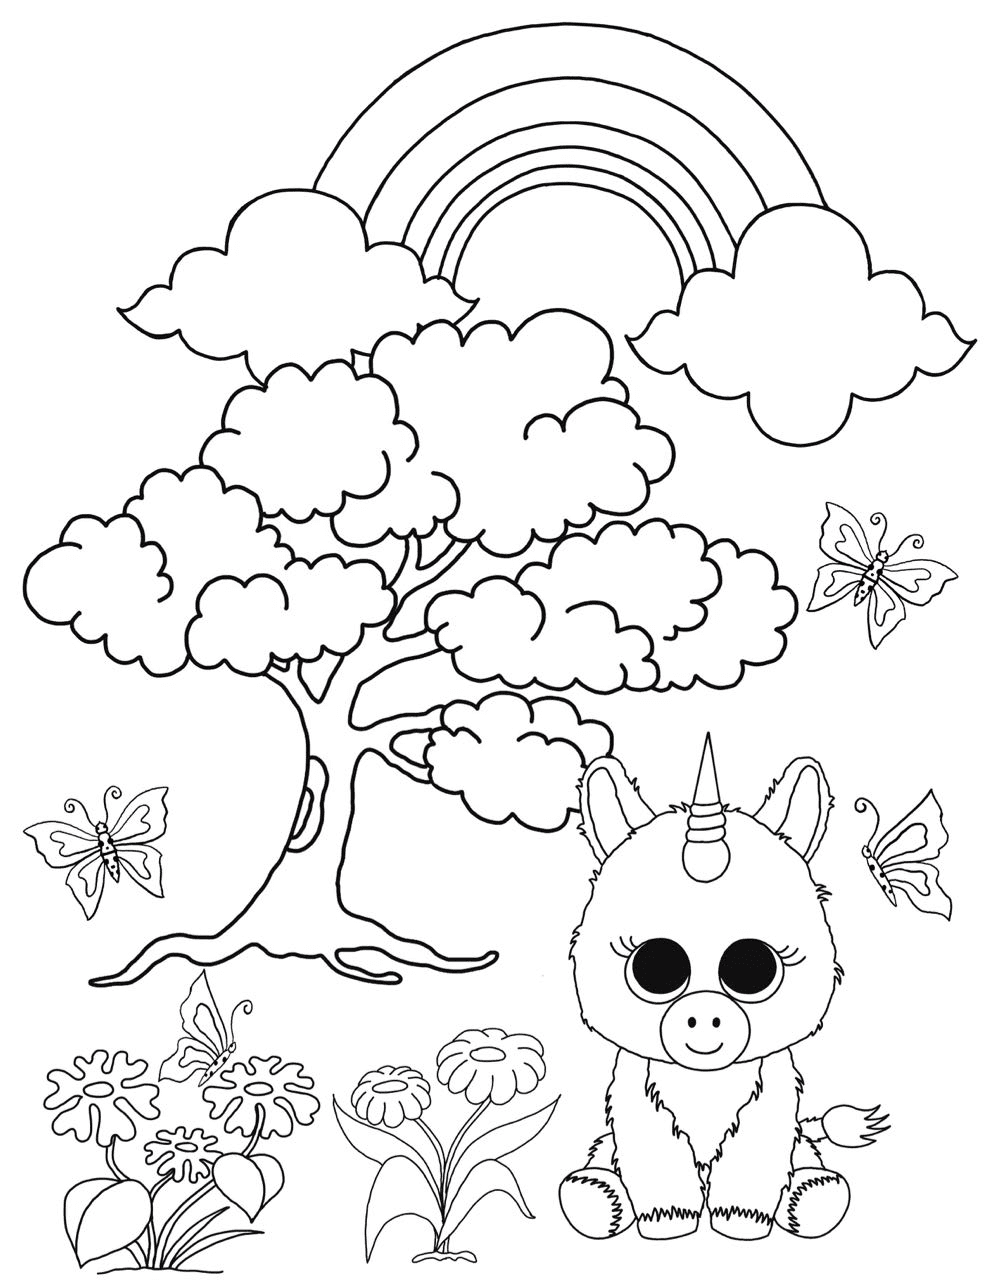 34 Cute Beanie Boos Coloring Pages Printable 34